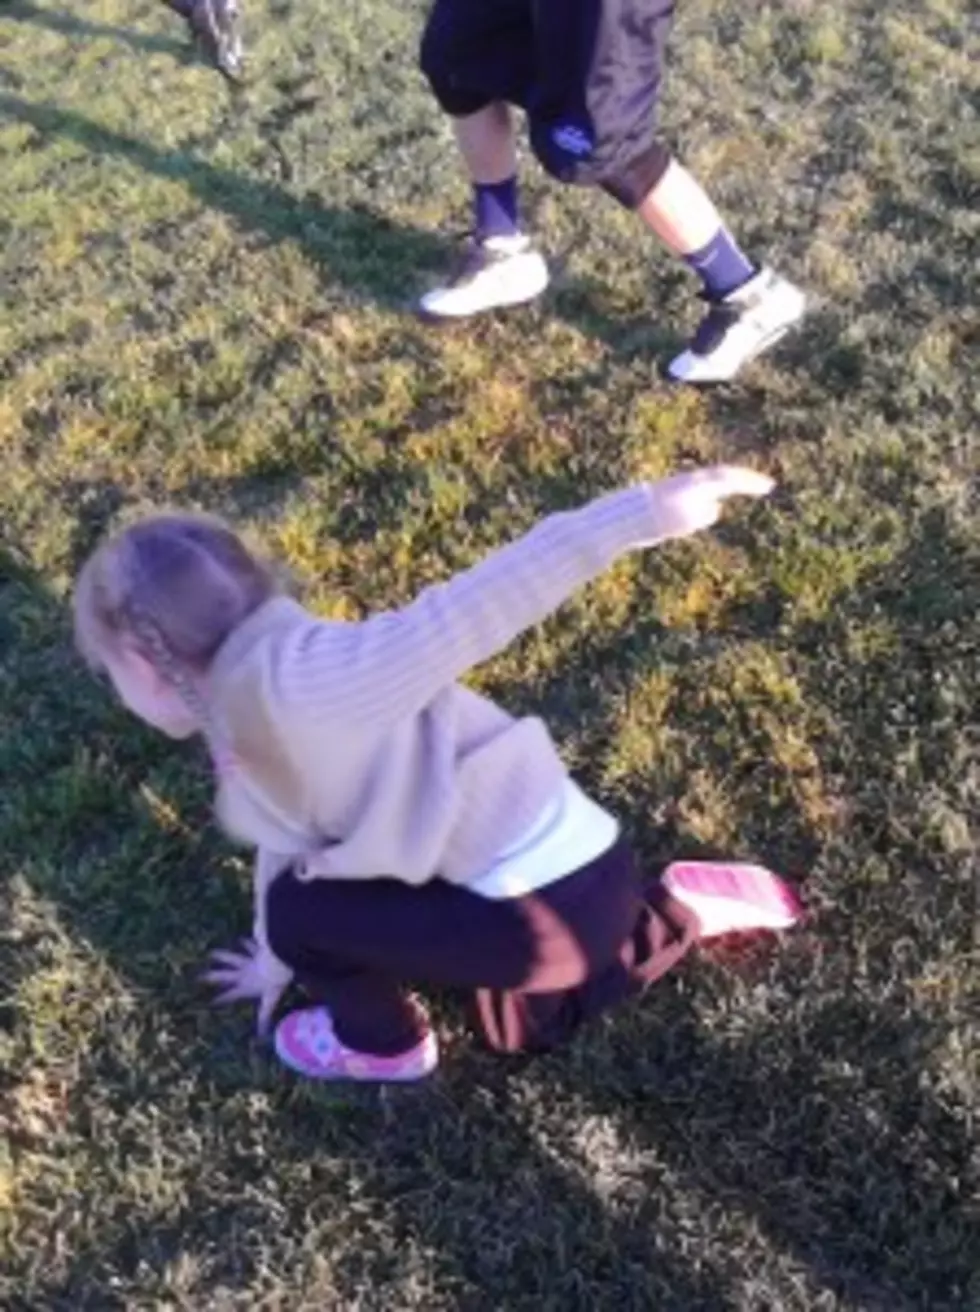 Adorable 4 Year Old Girl Practices With Youth Football Team [SLIDE SHOW]